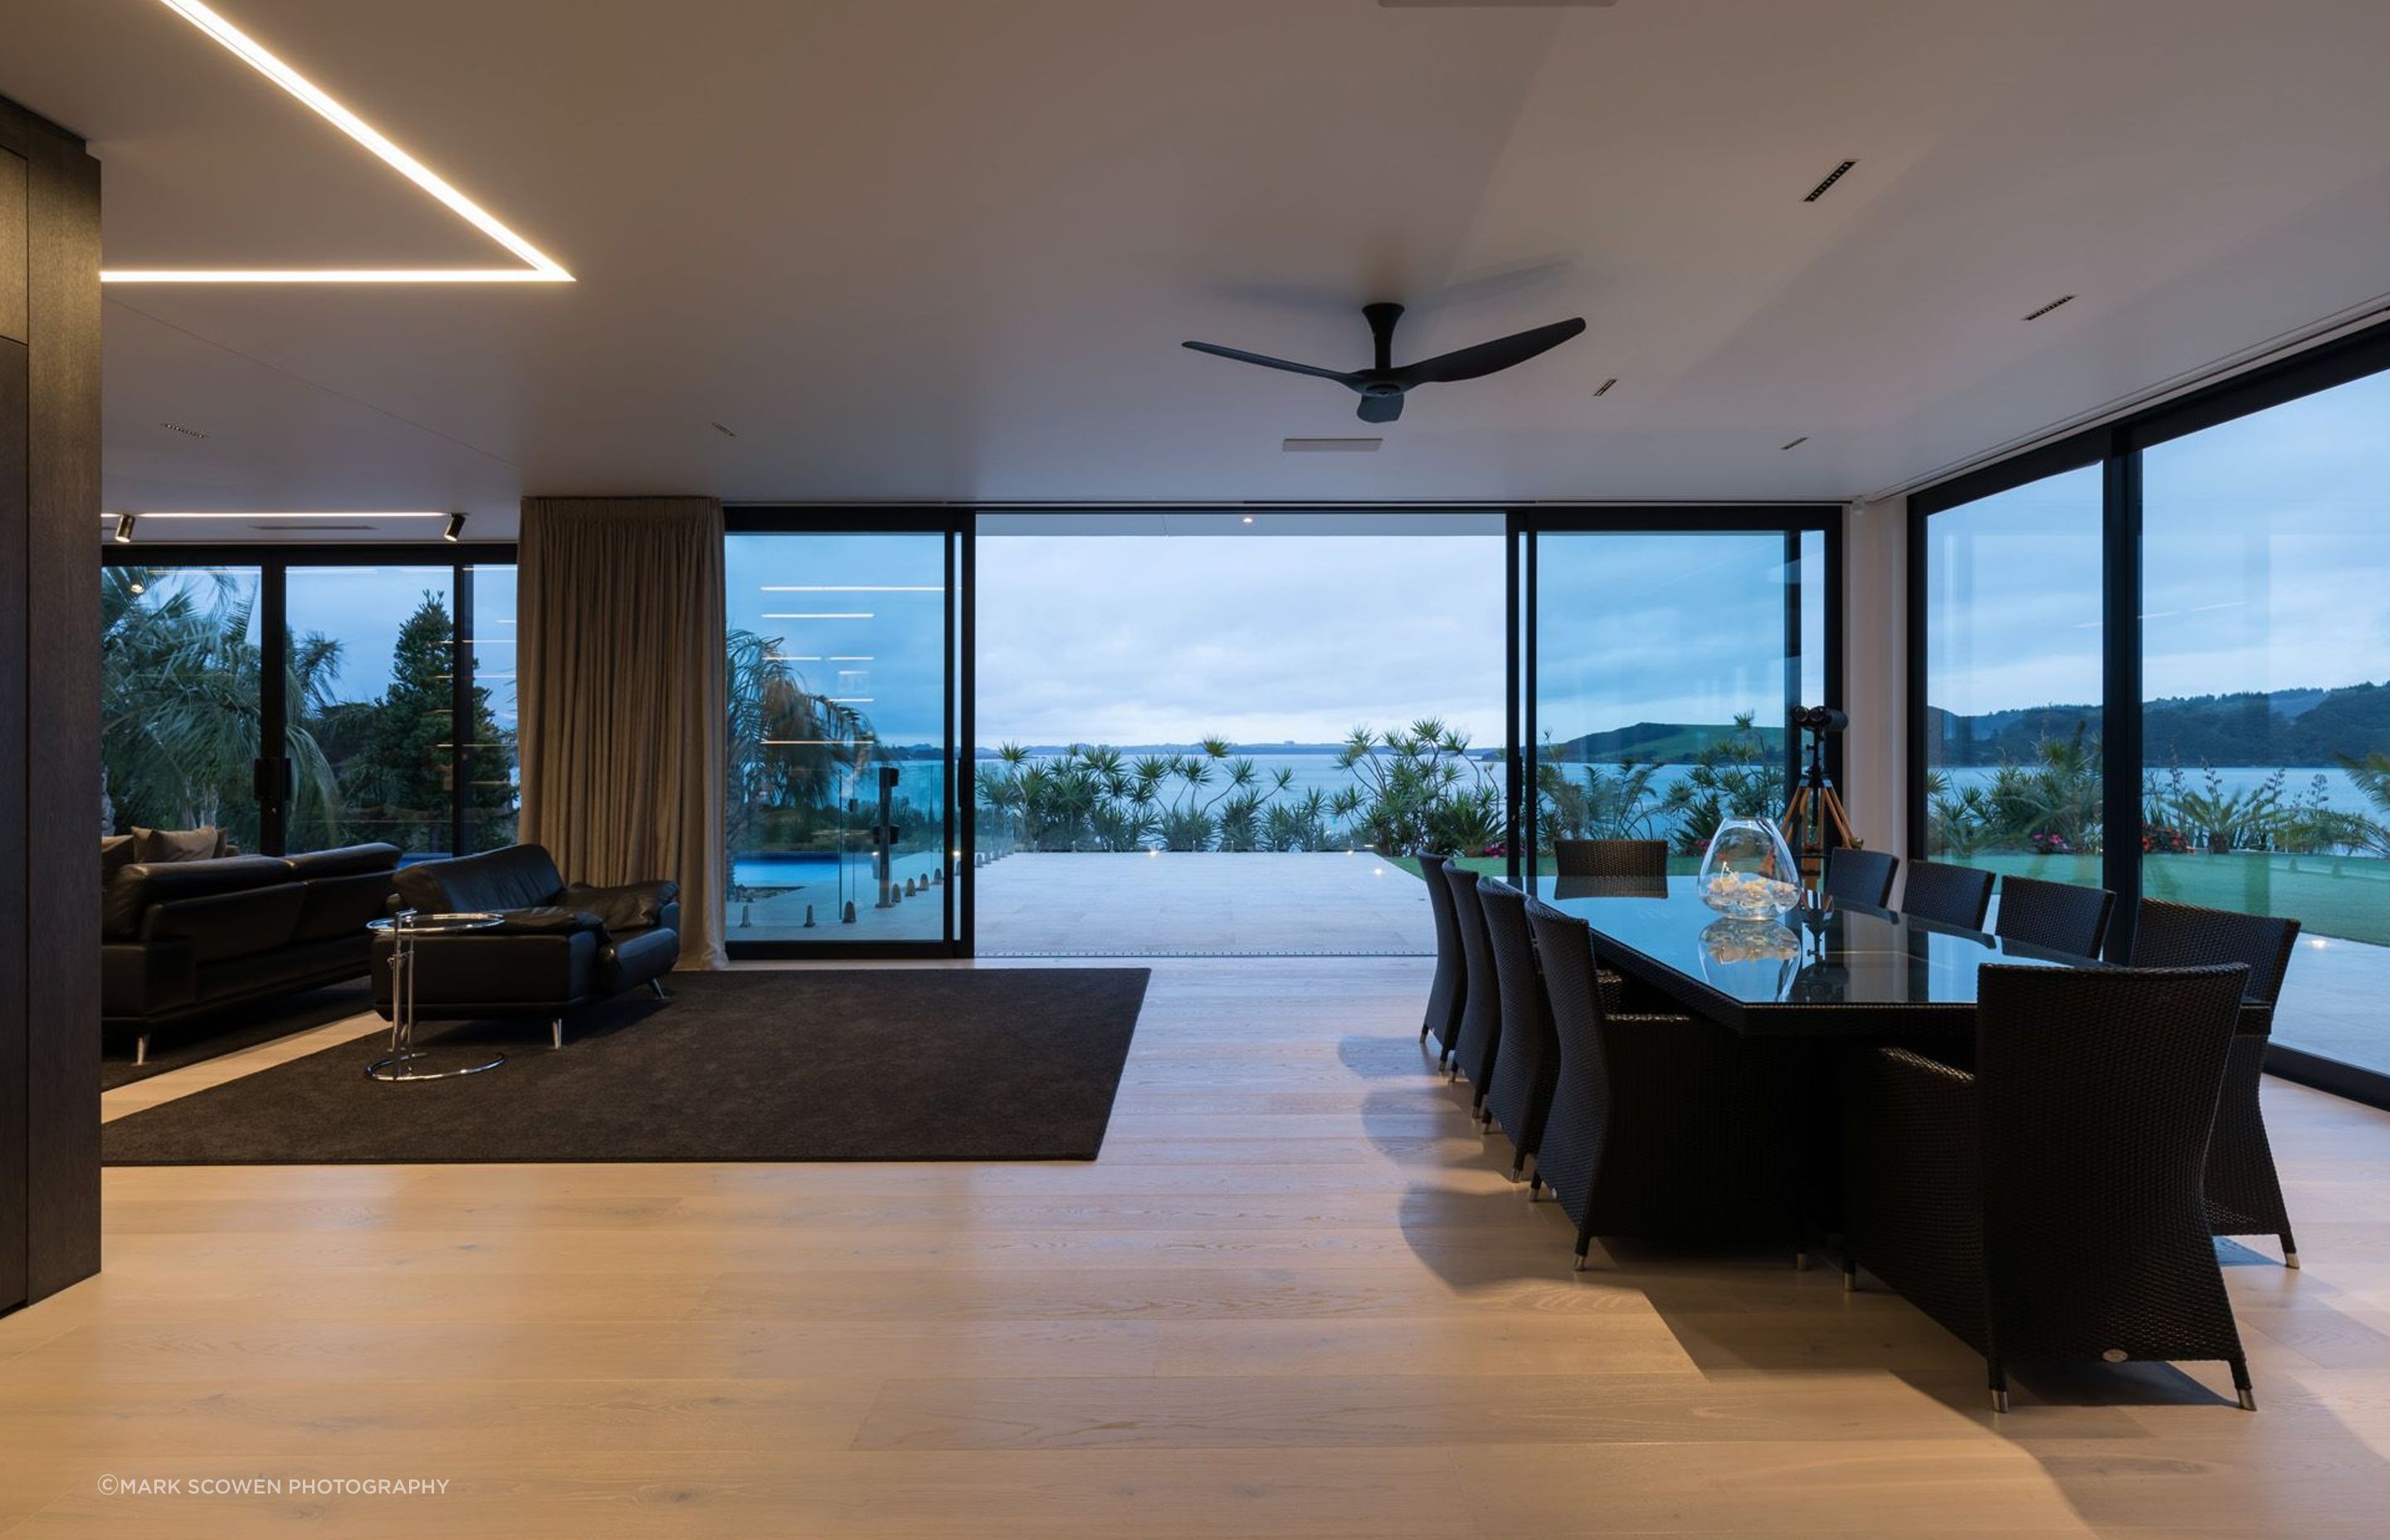 The entire open-plan dining and lounge area opens up with floor-to-ceiling doors to the harbour, the swimming pool area and a large lawn.